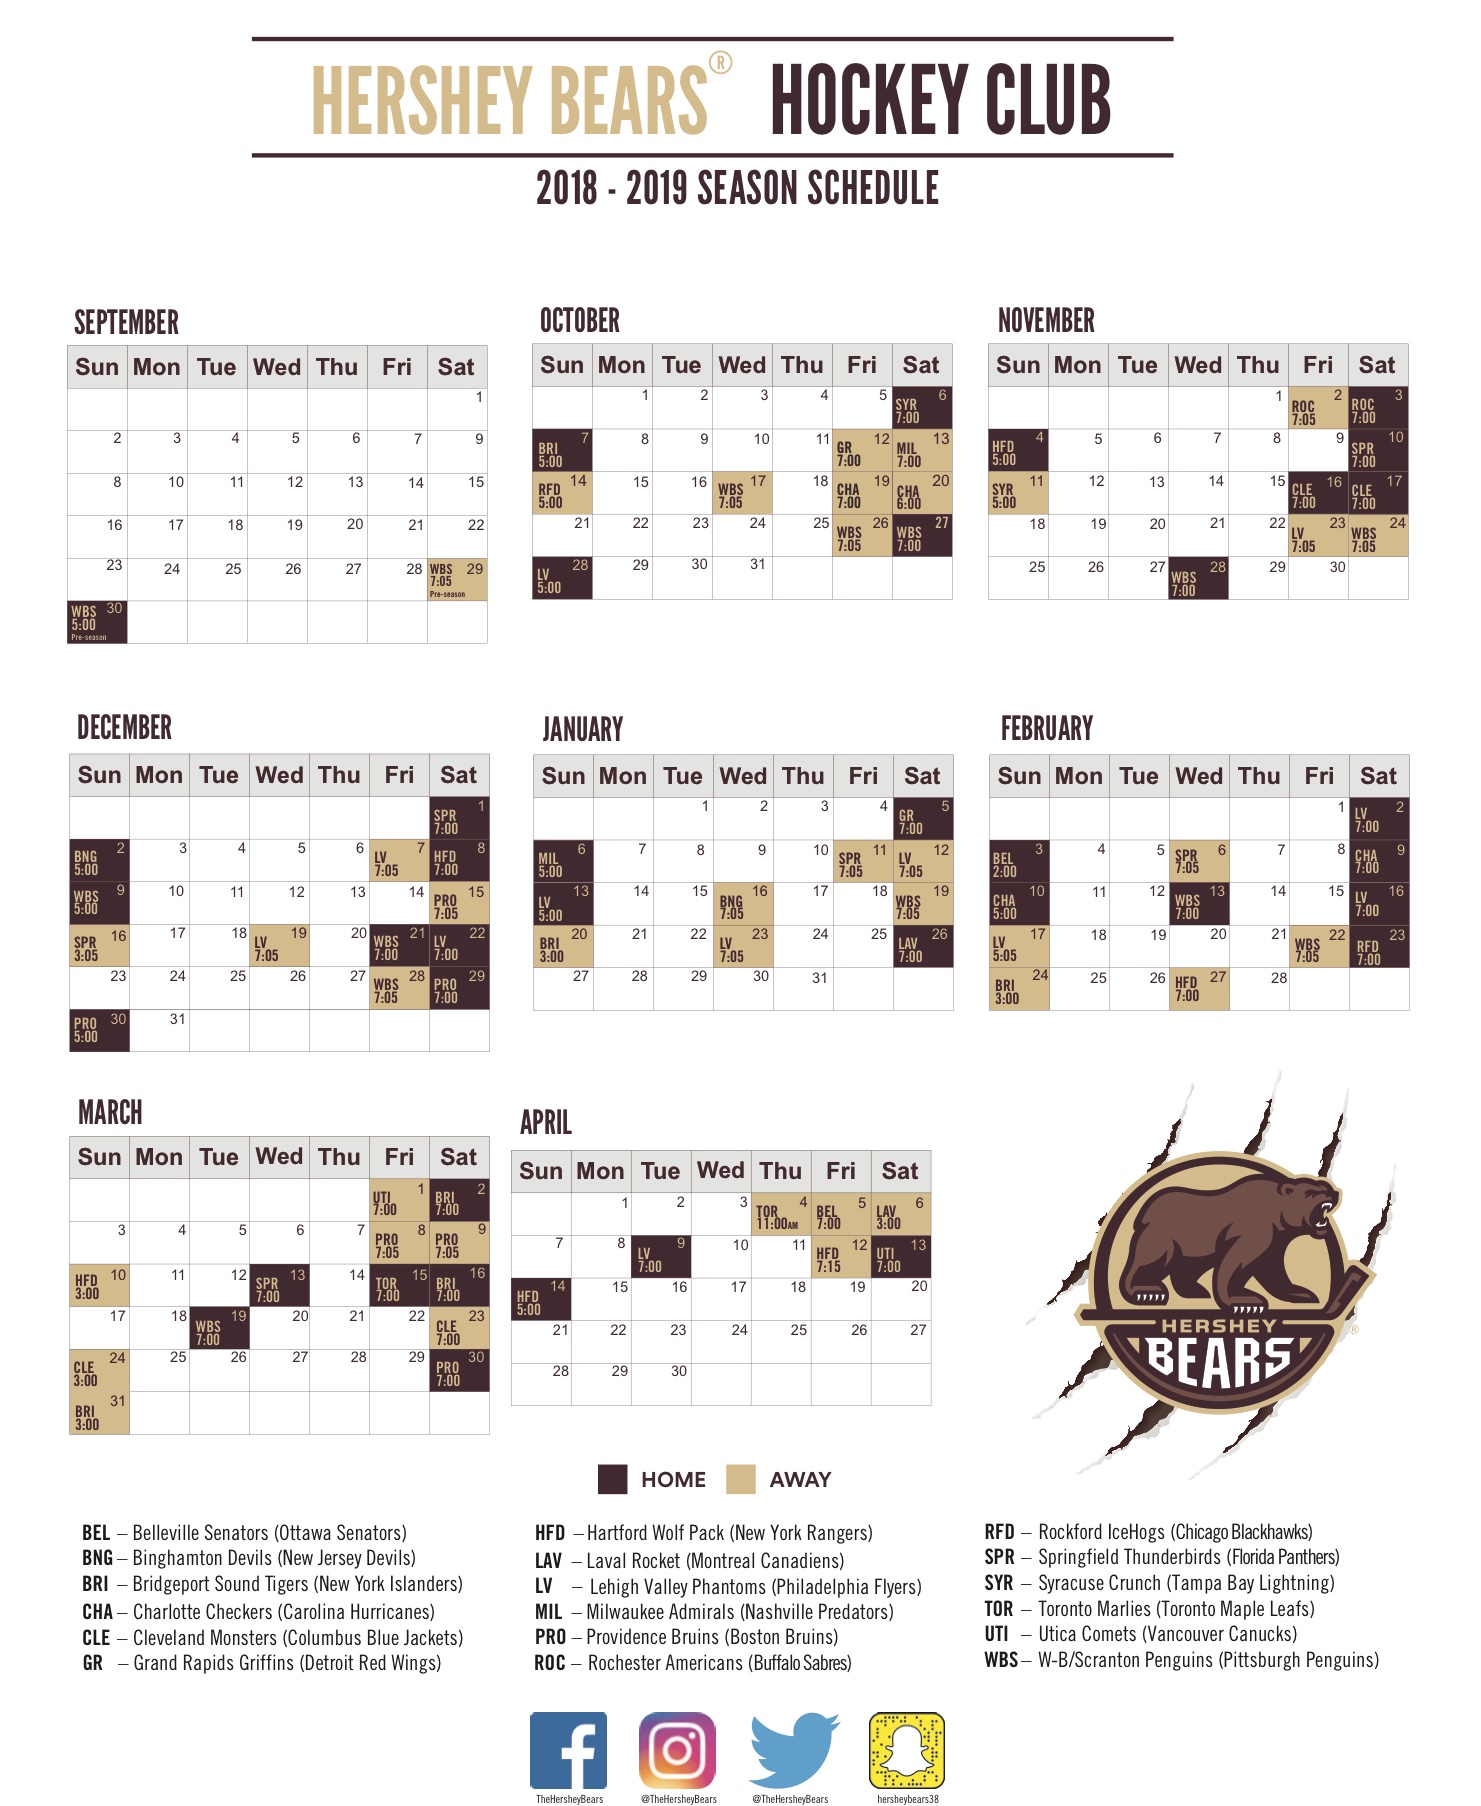 Hershey Bears Announce Preliminary Training Camp Roster; Set to Open